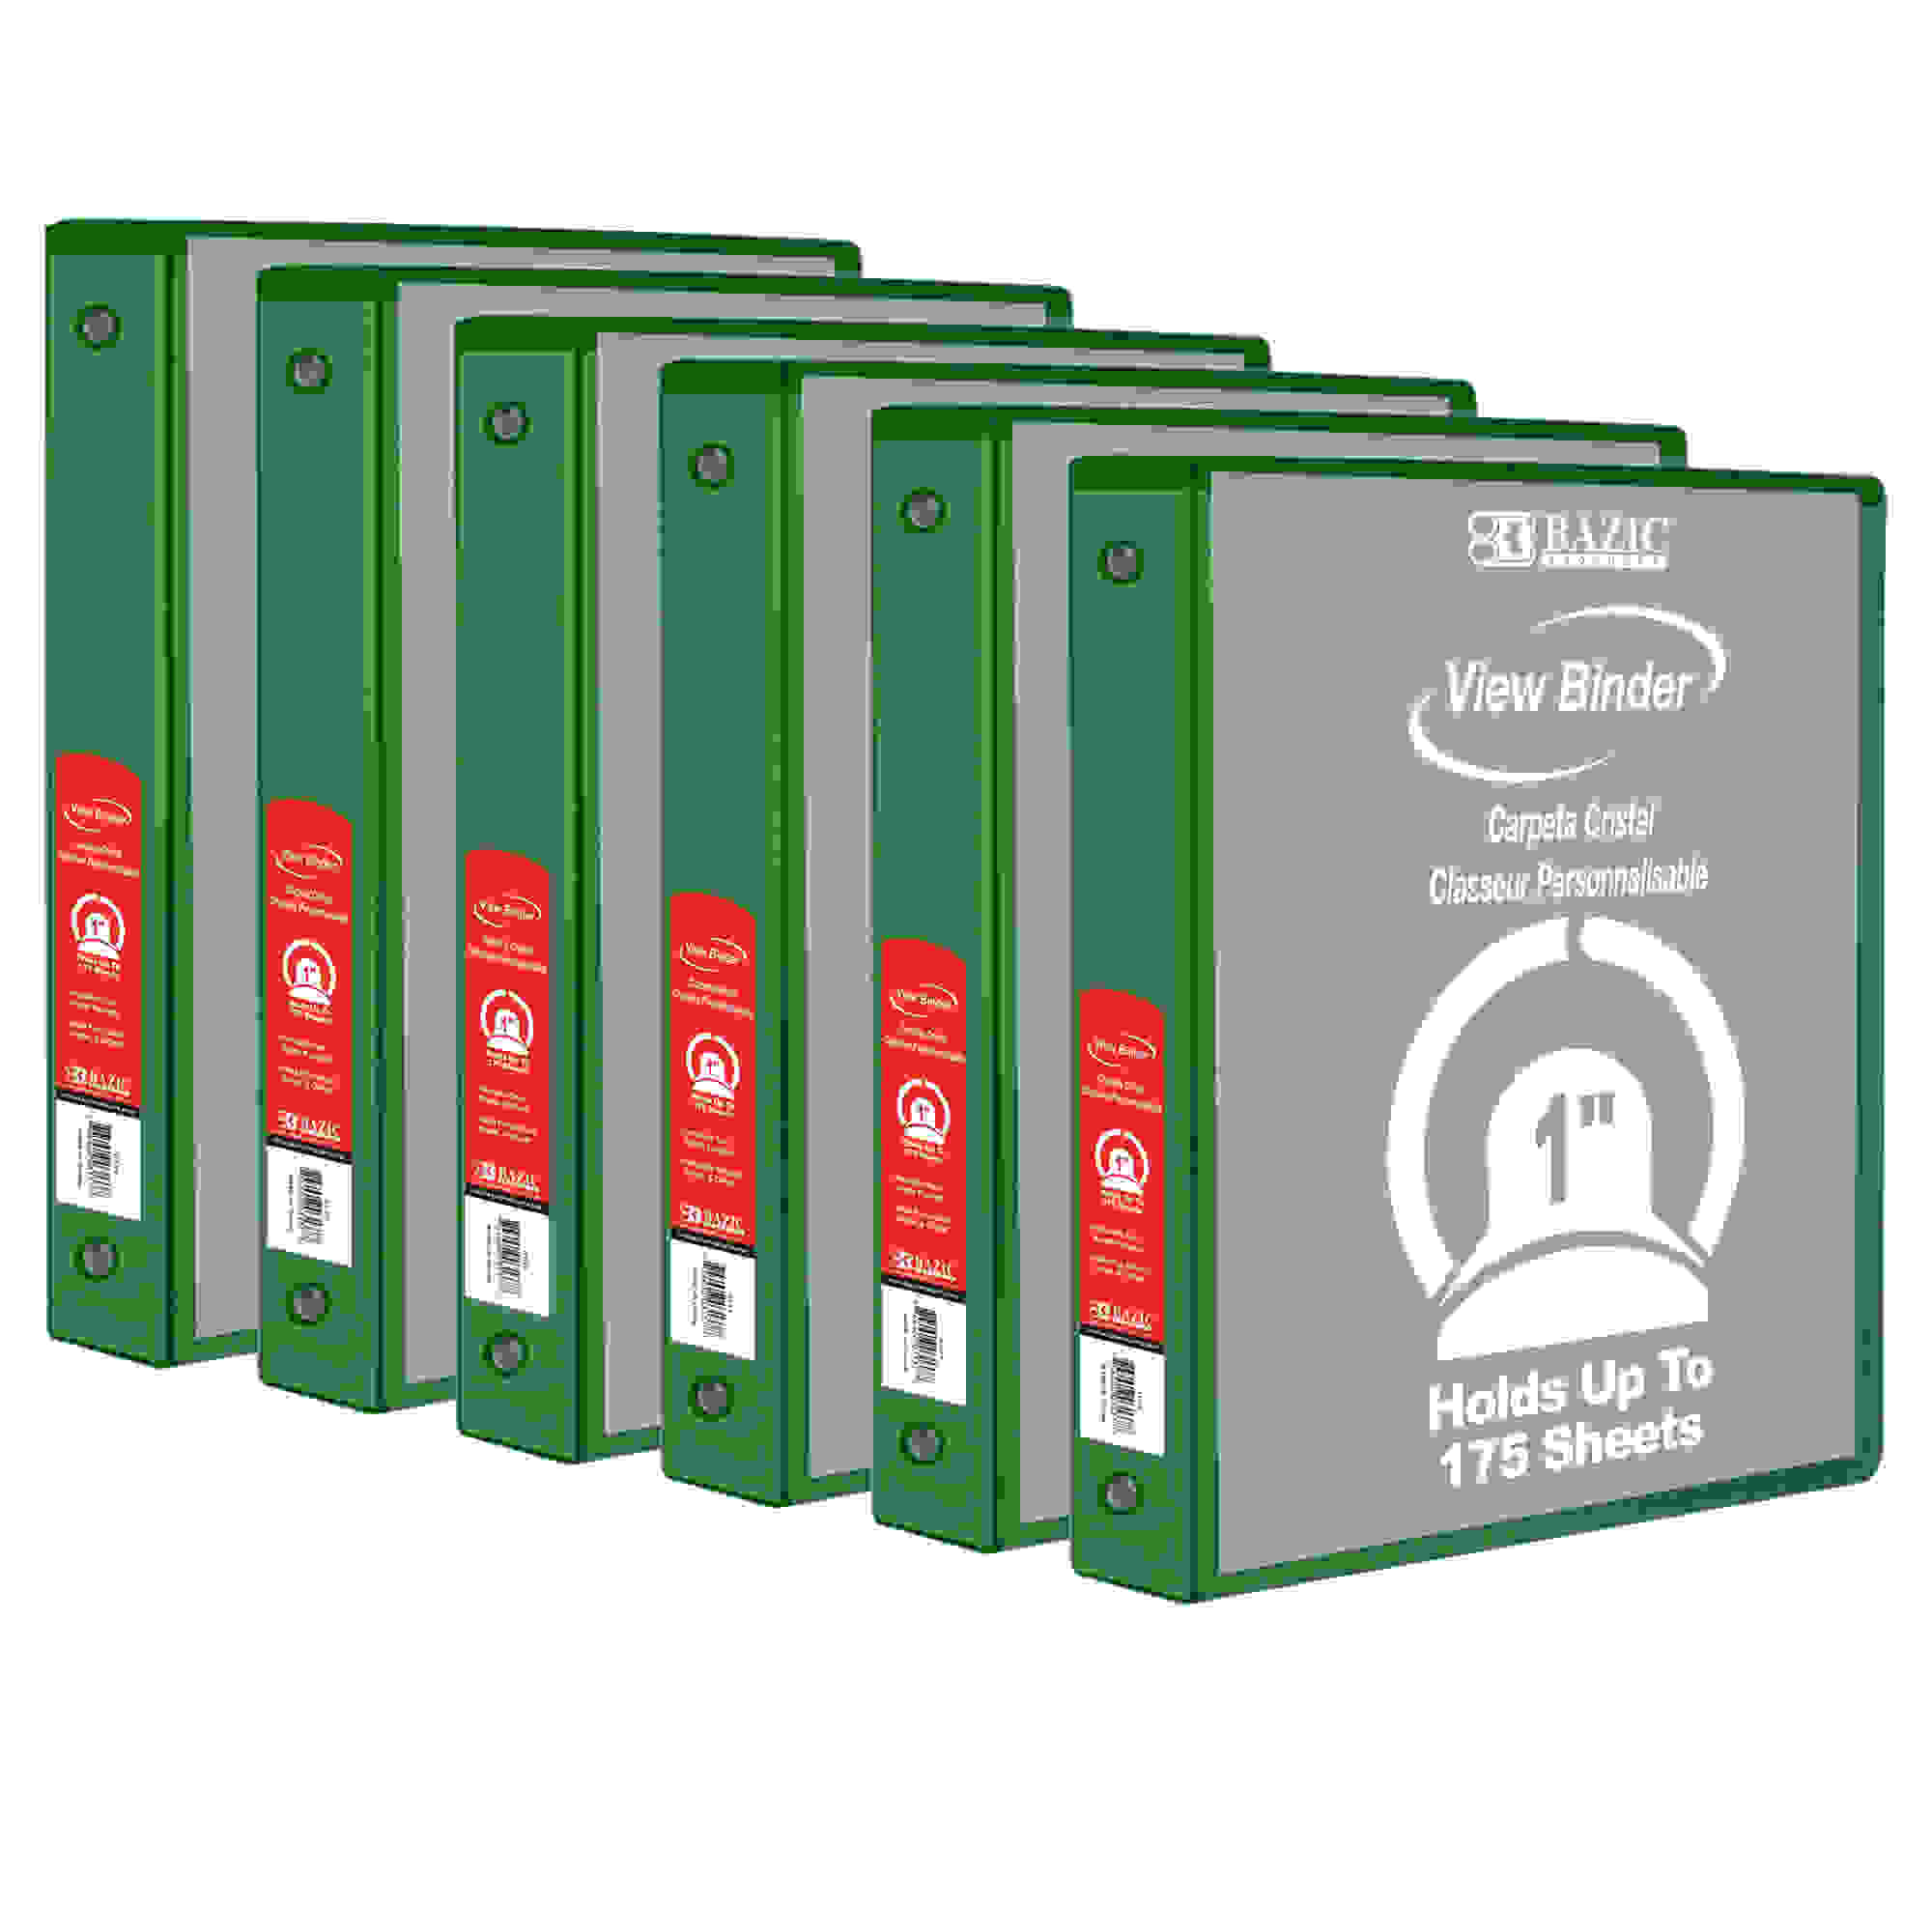 3-Ring View Binder with 2 Pockets, 1", Green, Pack of 6